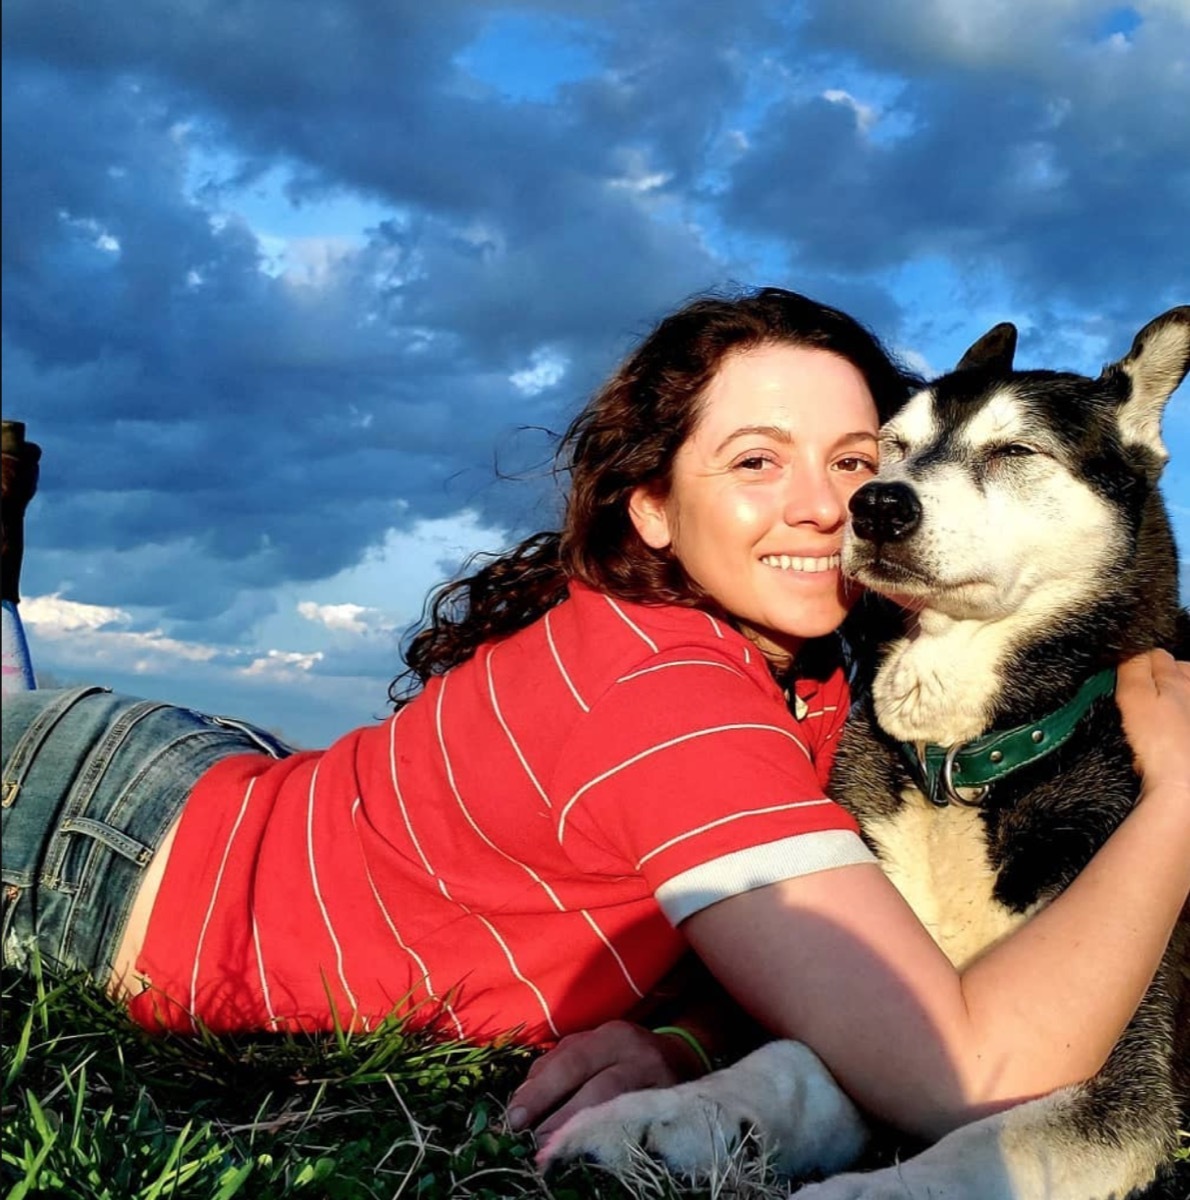 Mackenzie Rosman lying down in a red shirt hugging a black and white dog outdoors